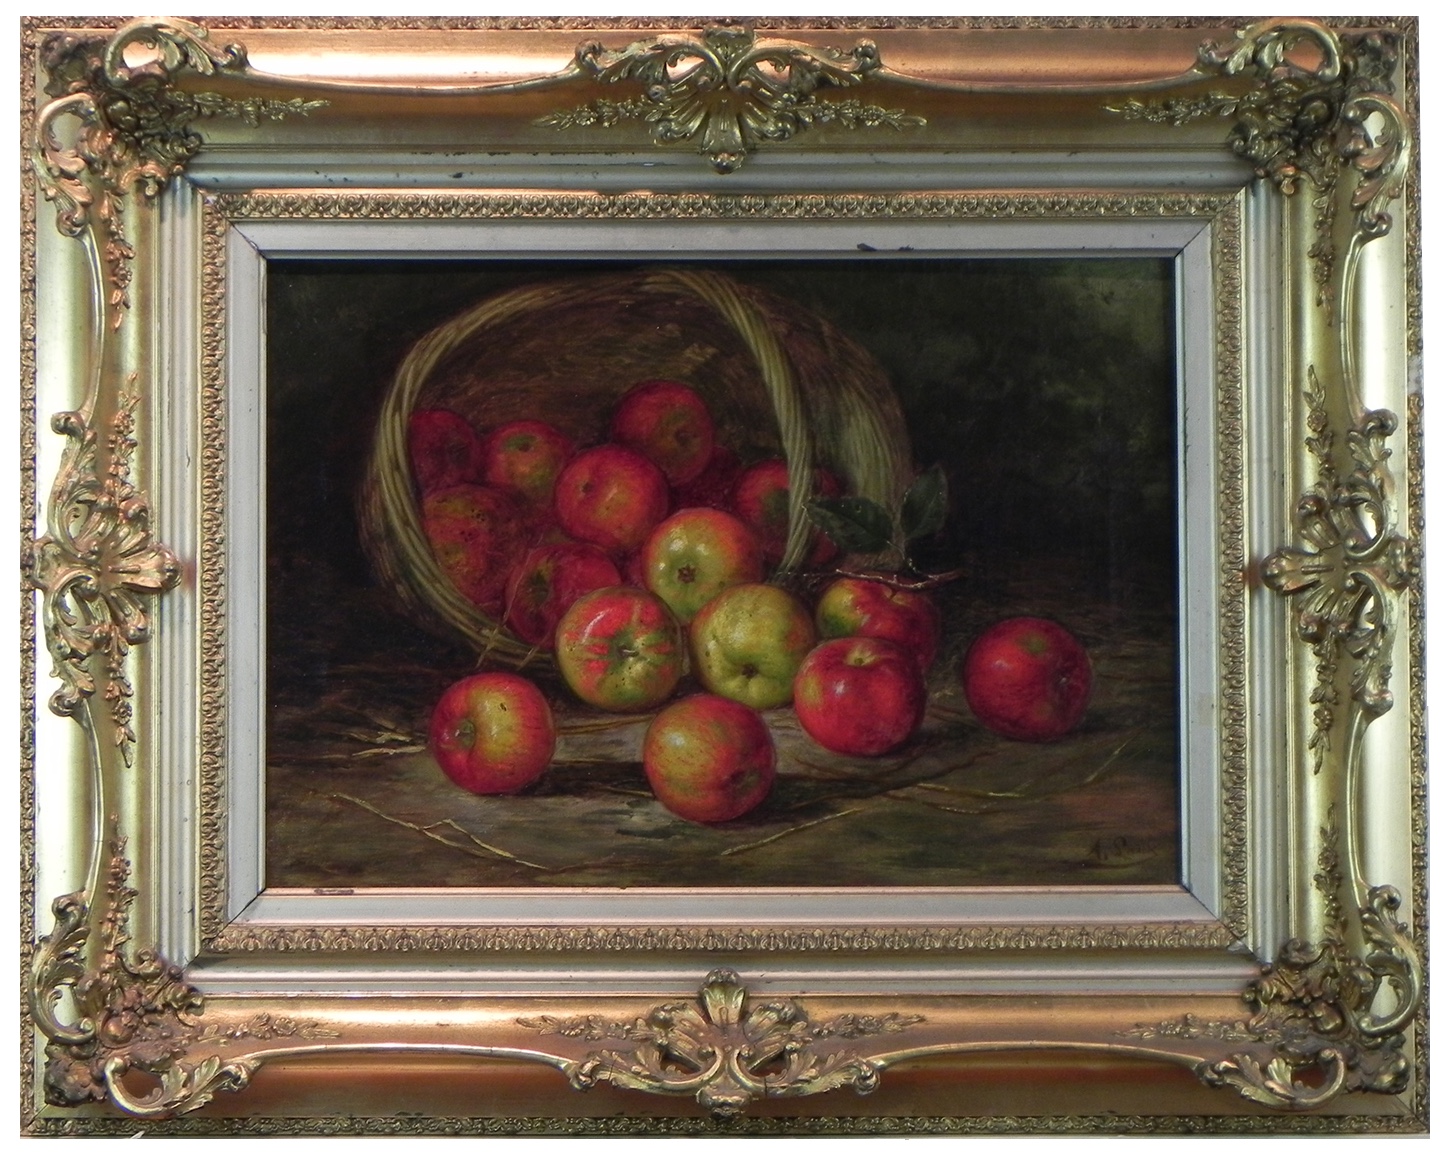 American Still Life with Apples and Basket